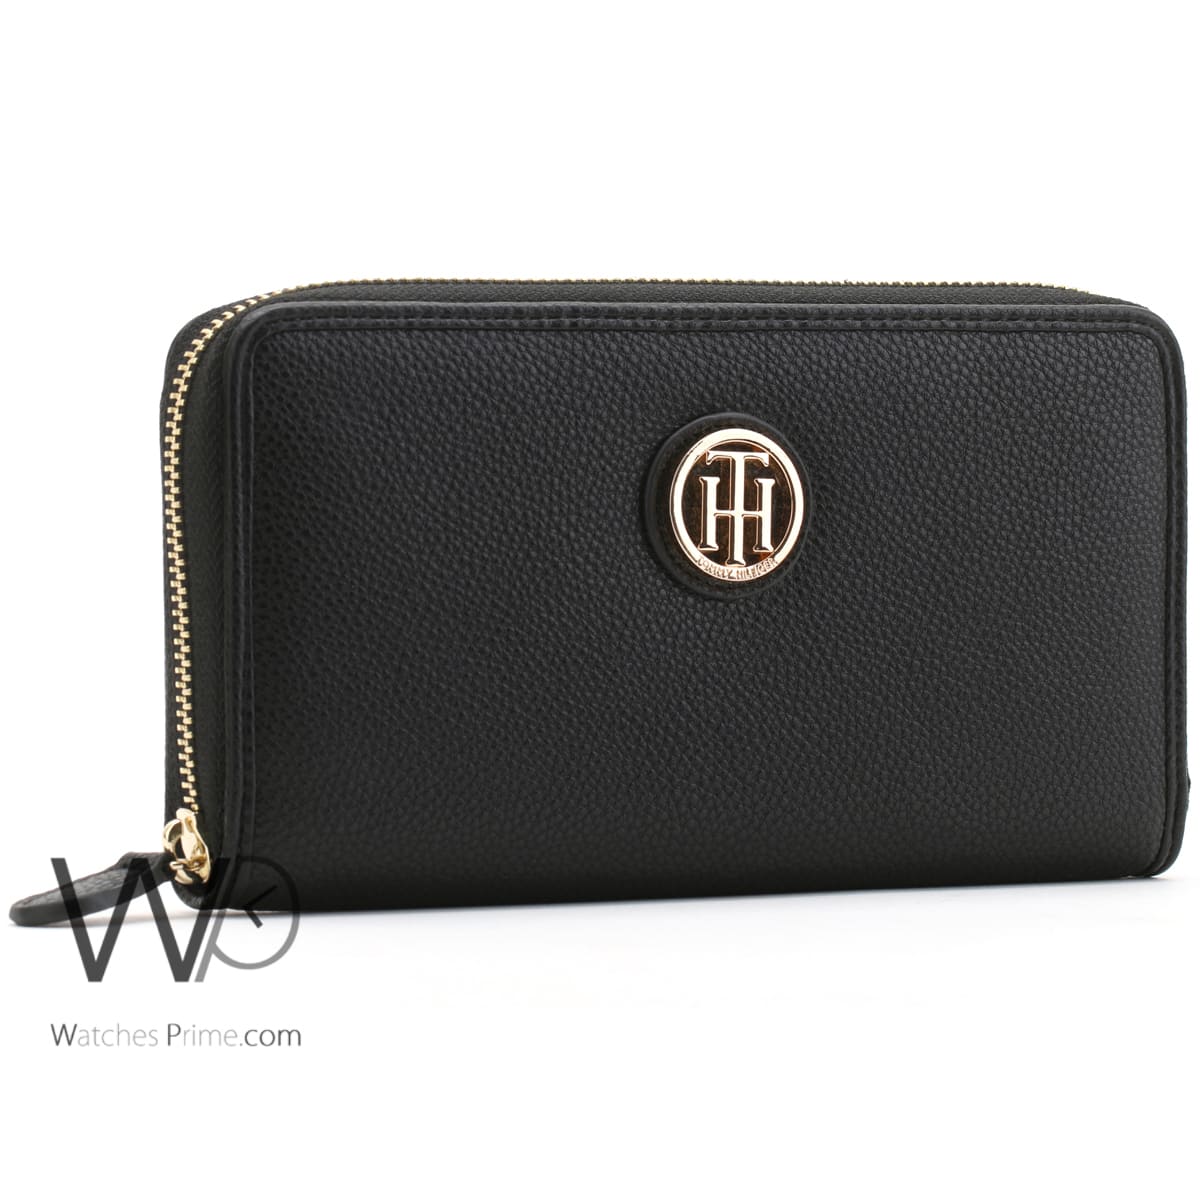 Tommy Hilfiger wallet for women | Watches Prime